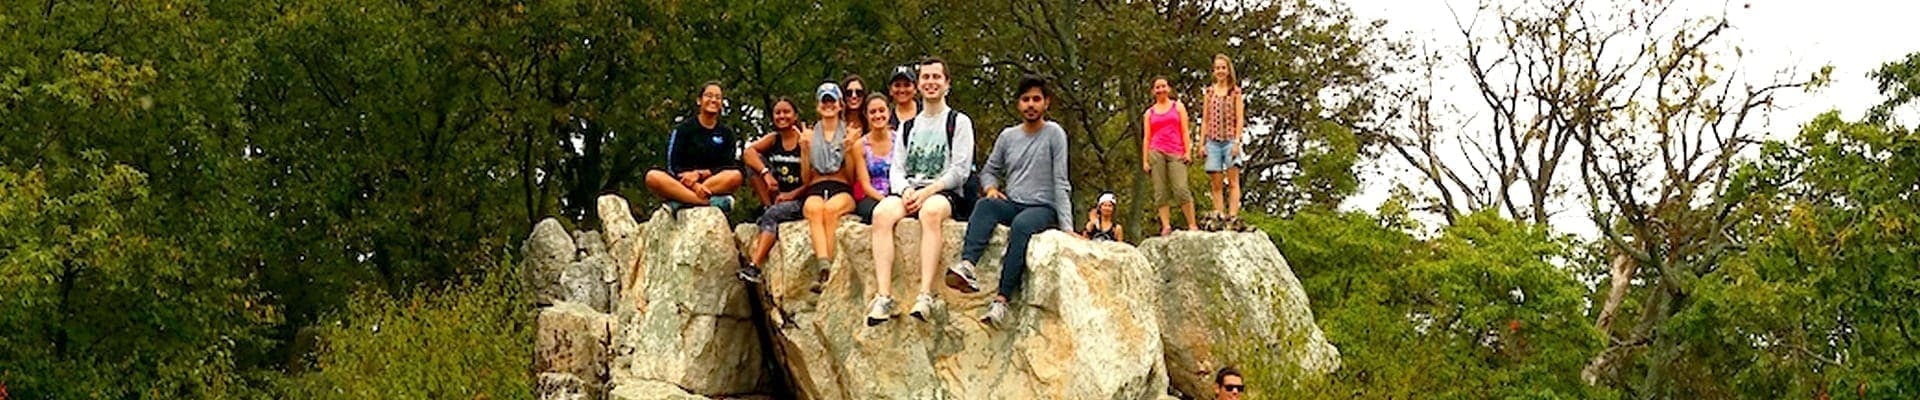 students on rock